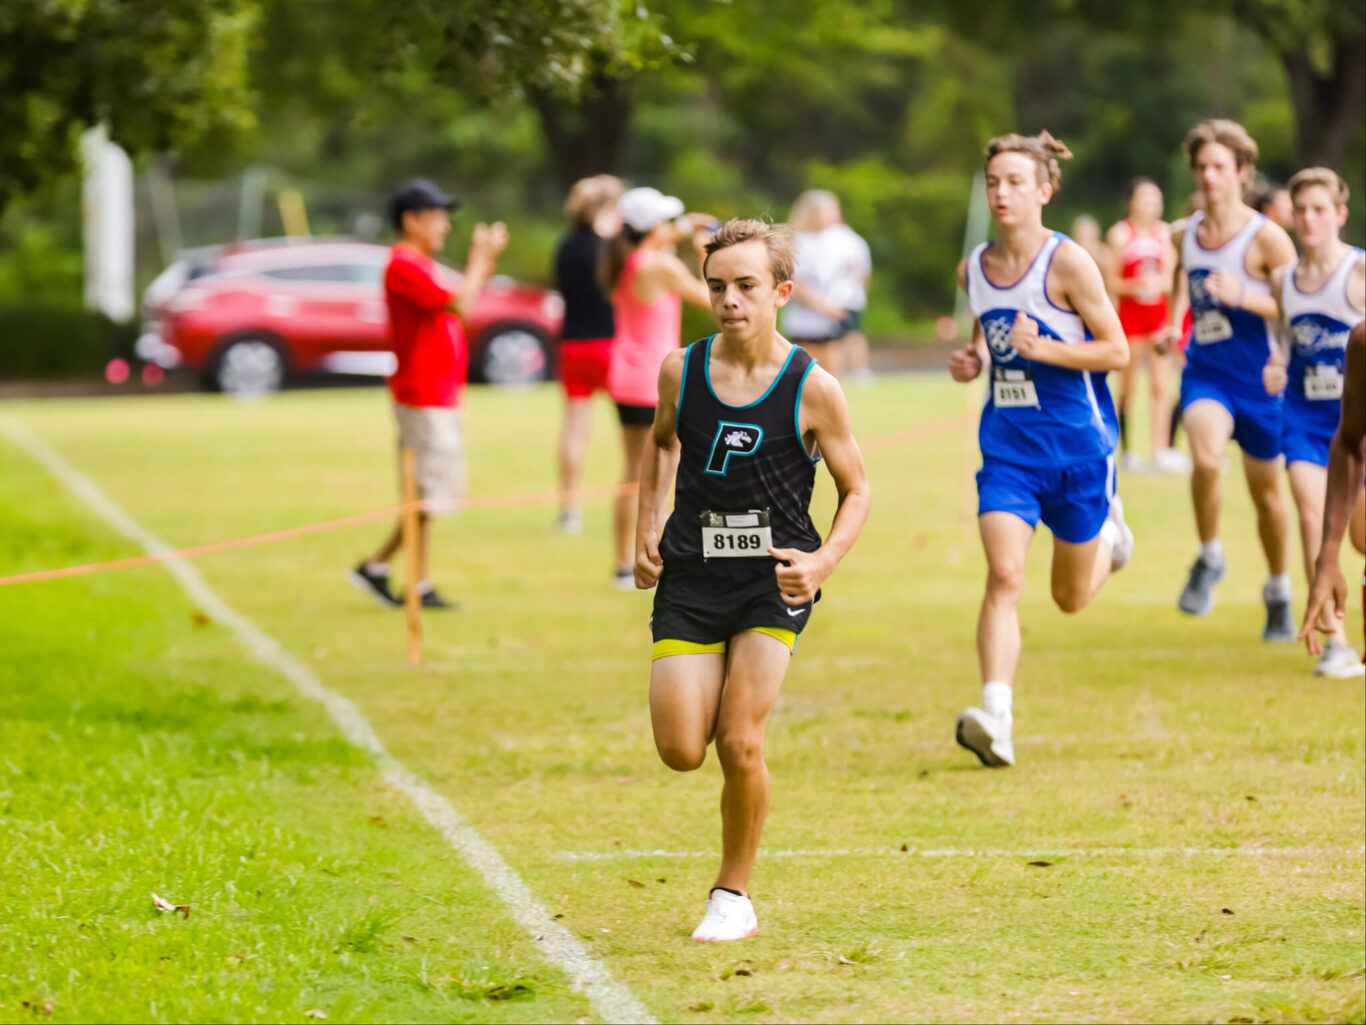 A group of boys competing in a cross country race.